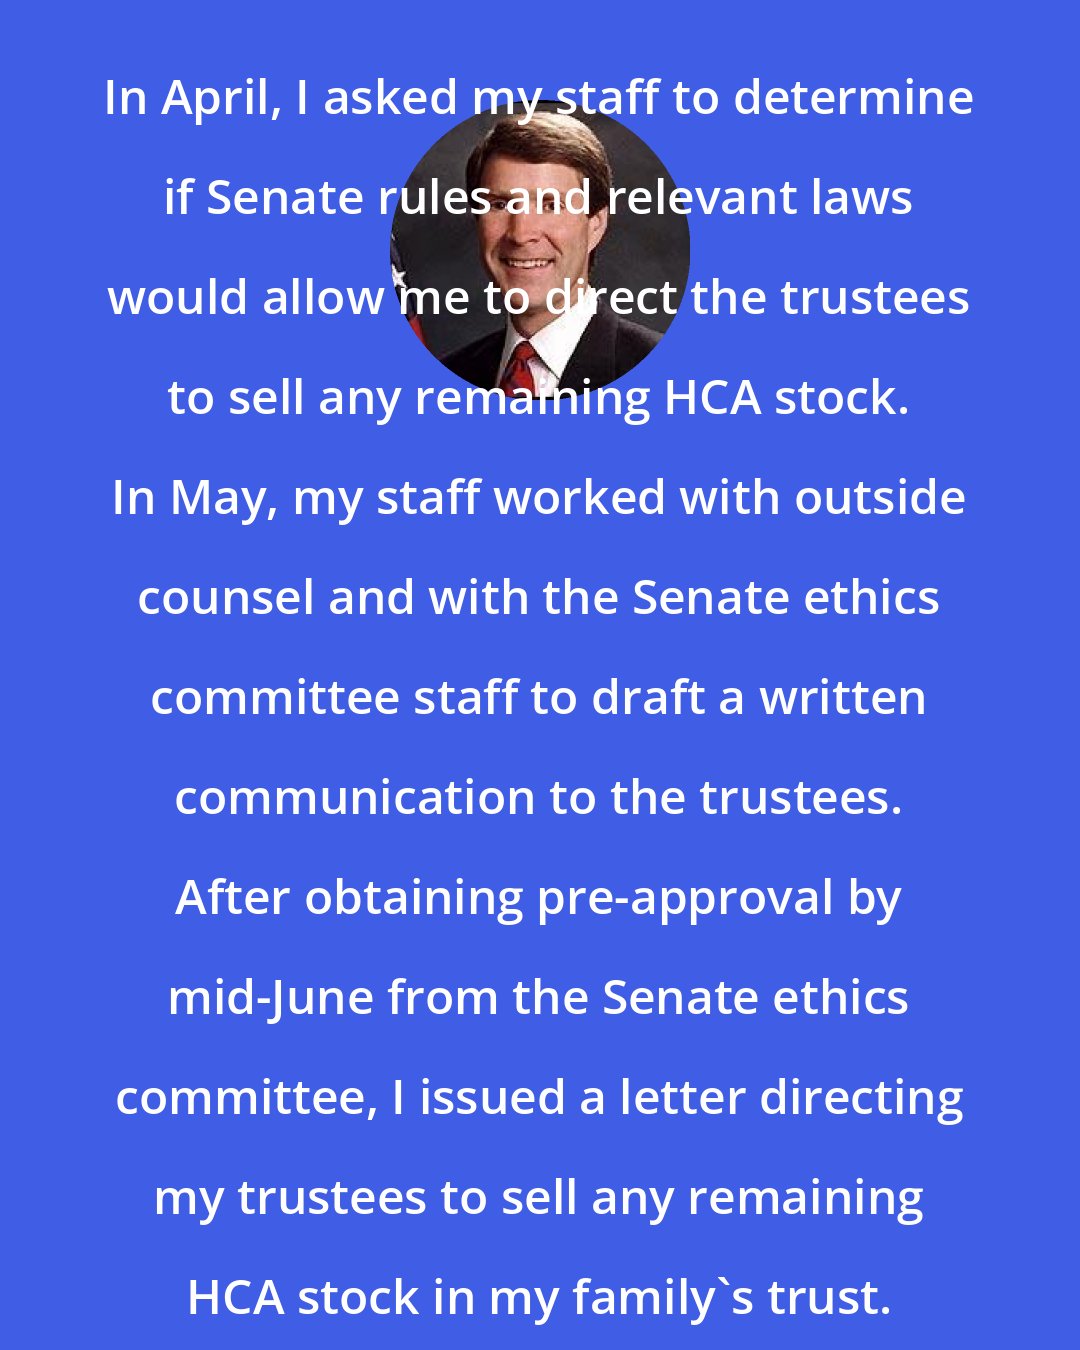 Bill Frist: In April, I asked my staff to determine if Senate rules and relevant laws would allow me to direct the trustees to sell any remaining HCA stock. In May, my staff worked with outside counsel and with the Senate ethics committee staff to draft a written communication to the trustees. After obtaining pre-approval by mid-June from the Senate ethics committee, I issued a letter directing my trustees to sell any remaining HCA stock in my family's trust.